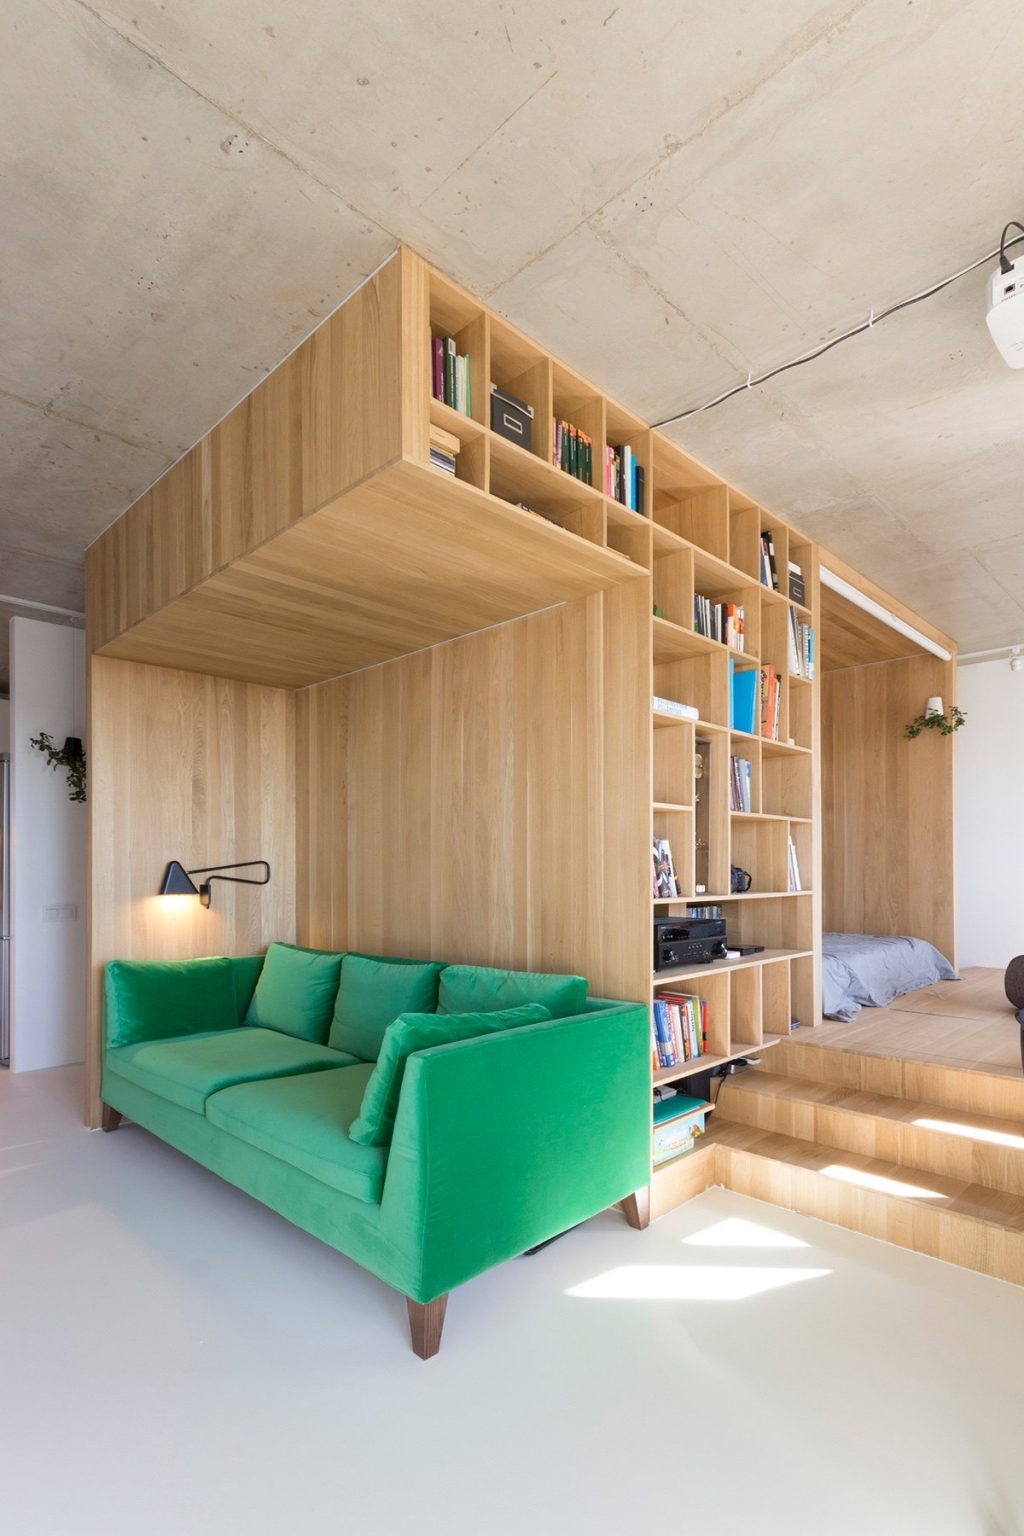 1.Feature-leaf-green-velvet-couch-under-50sqm-living-room-backed-by-bookcase